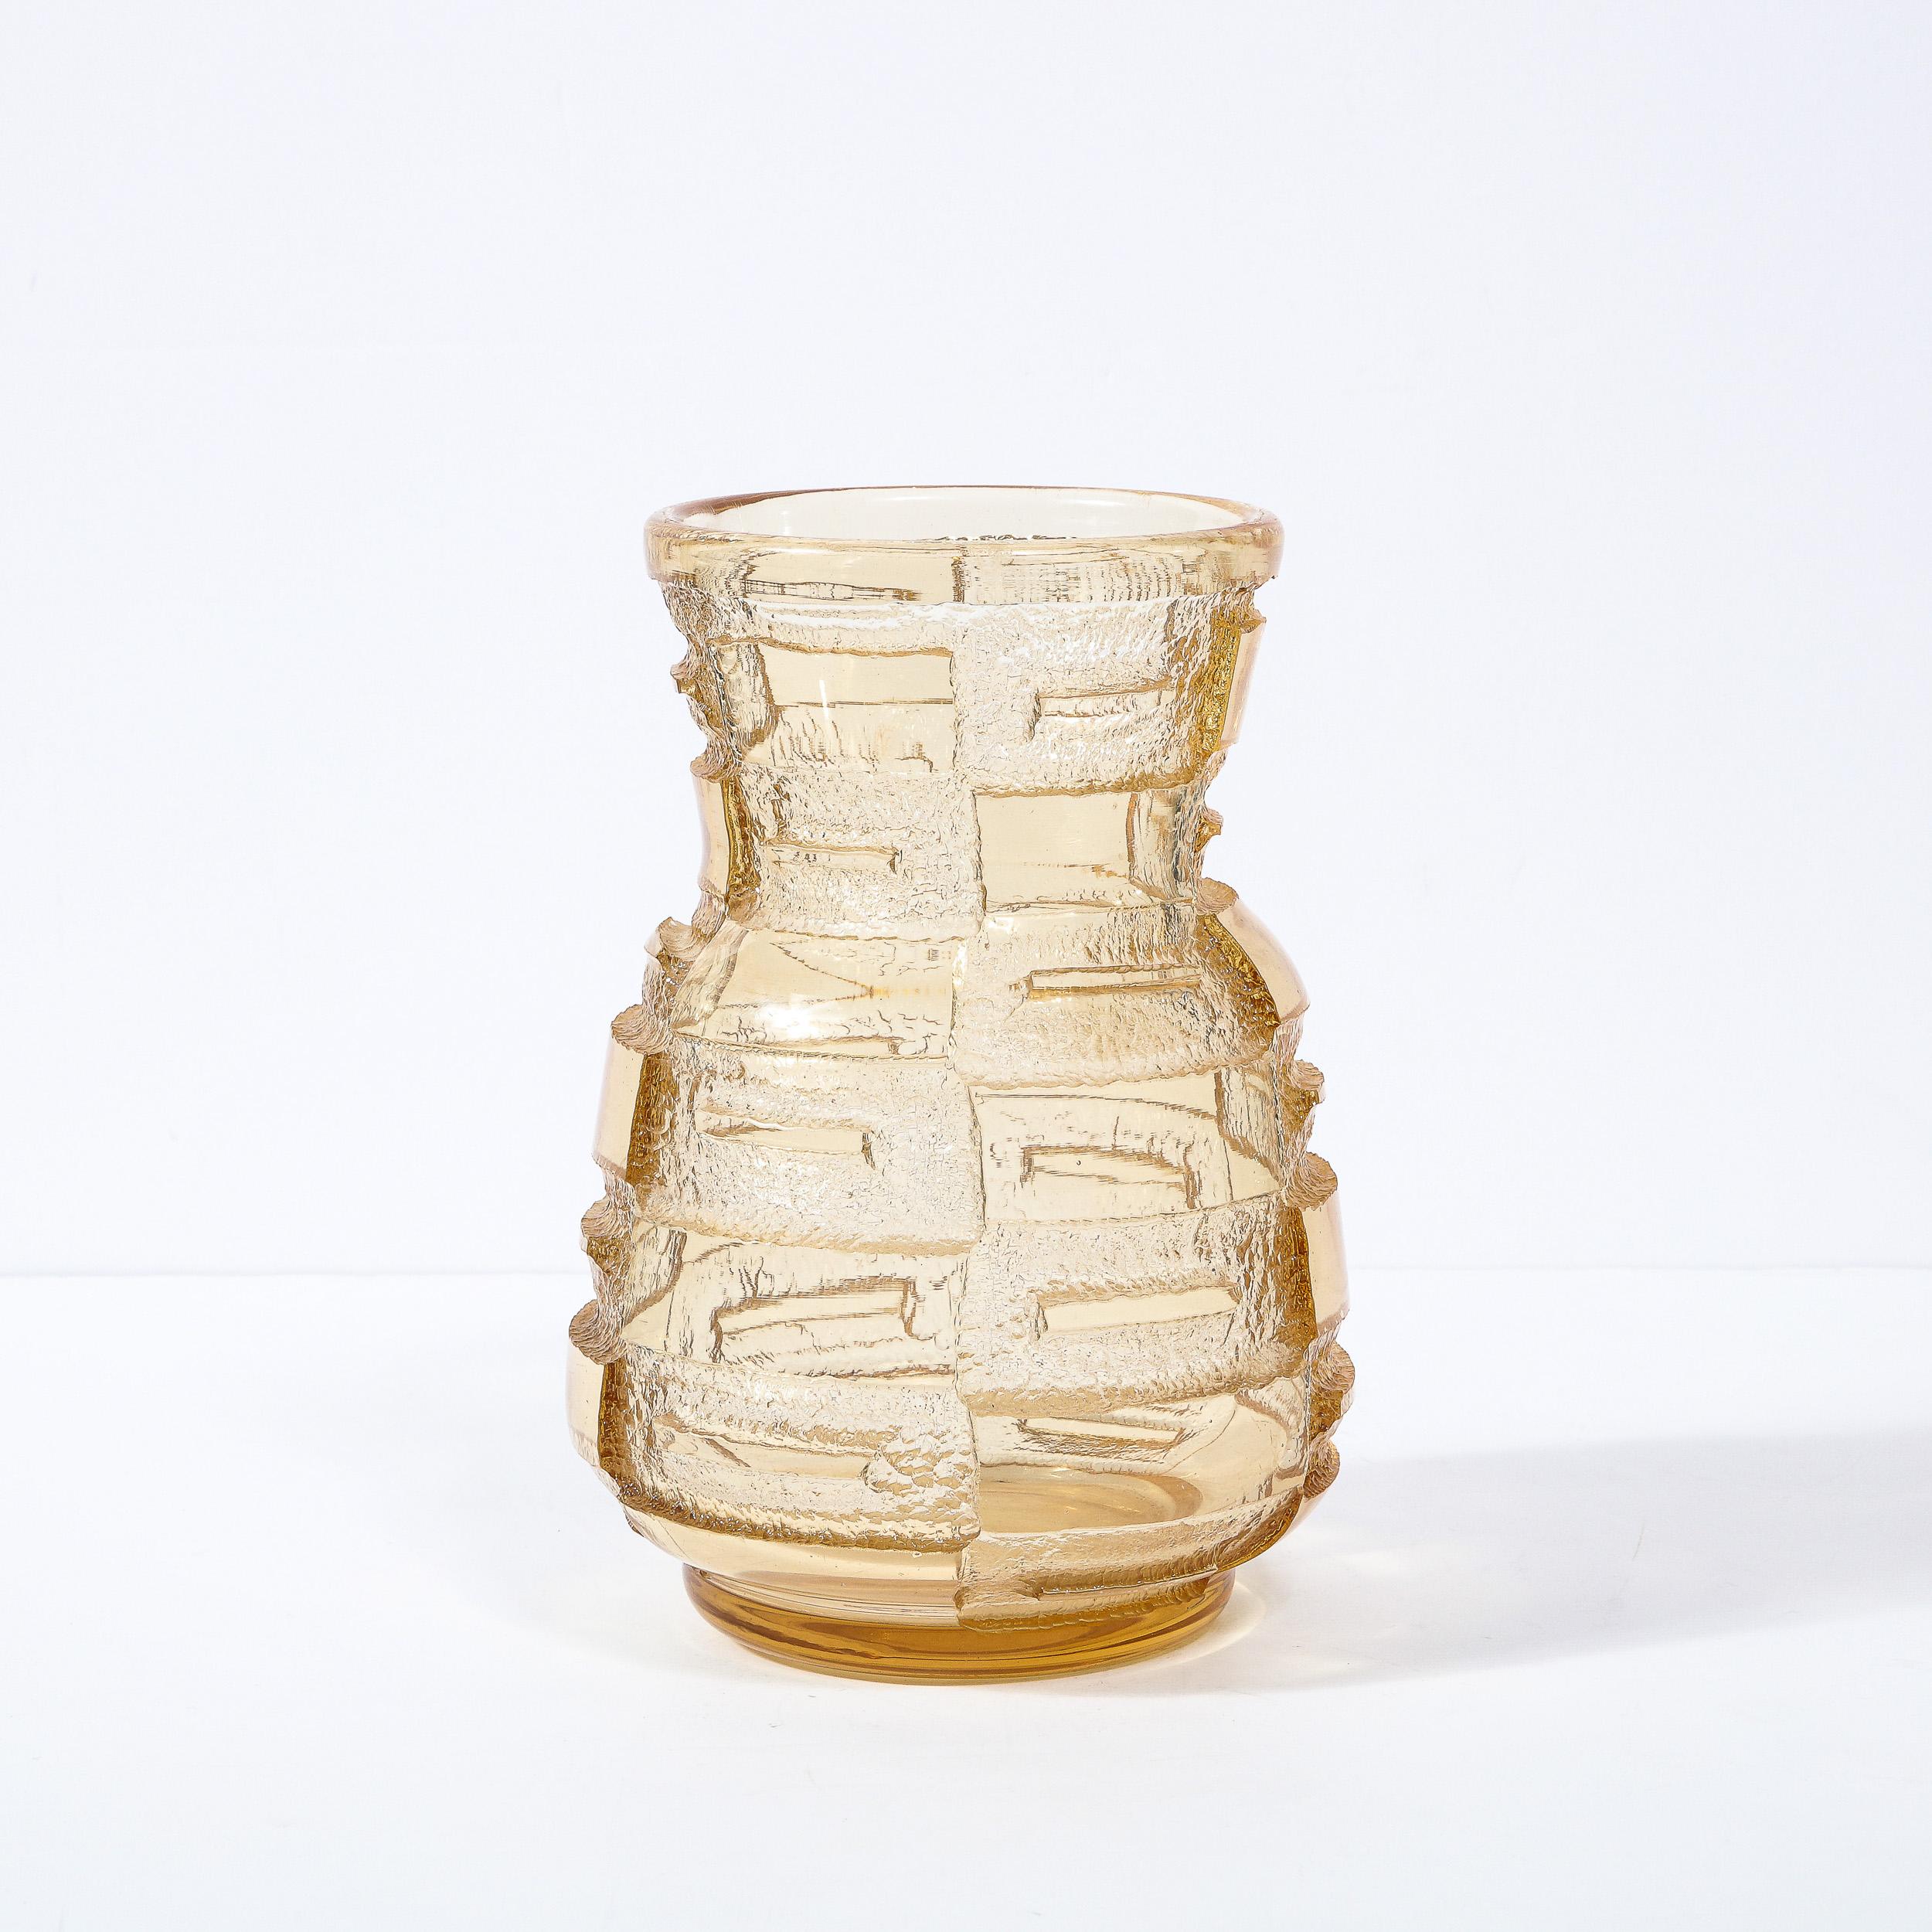 Art Deco Acid Etched Smoked Citrine Recess Molded Vase Signed by Daum Nancy In Excellent Condition For Sale In New York, NY